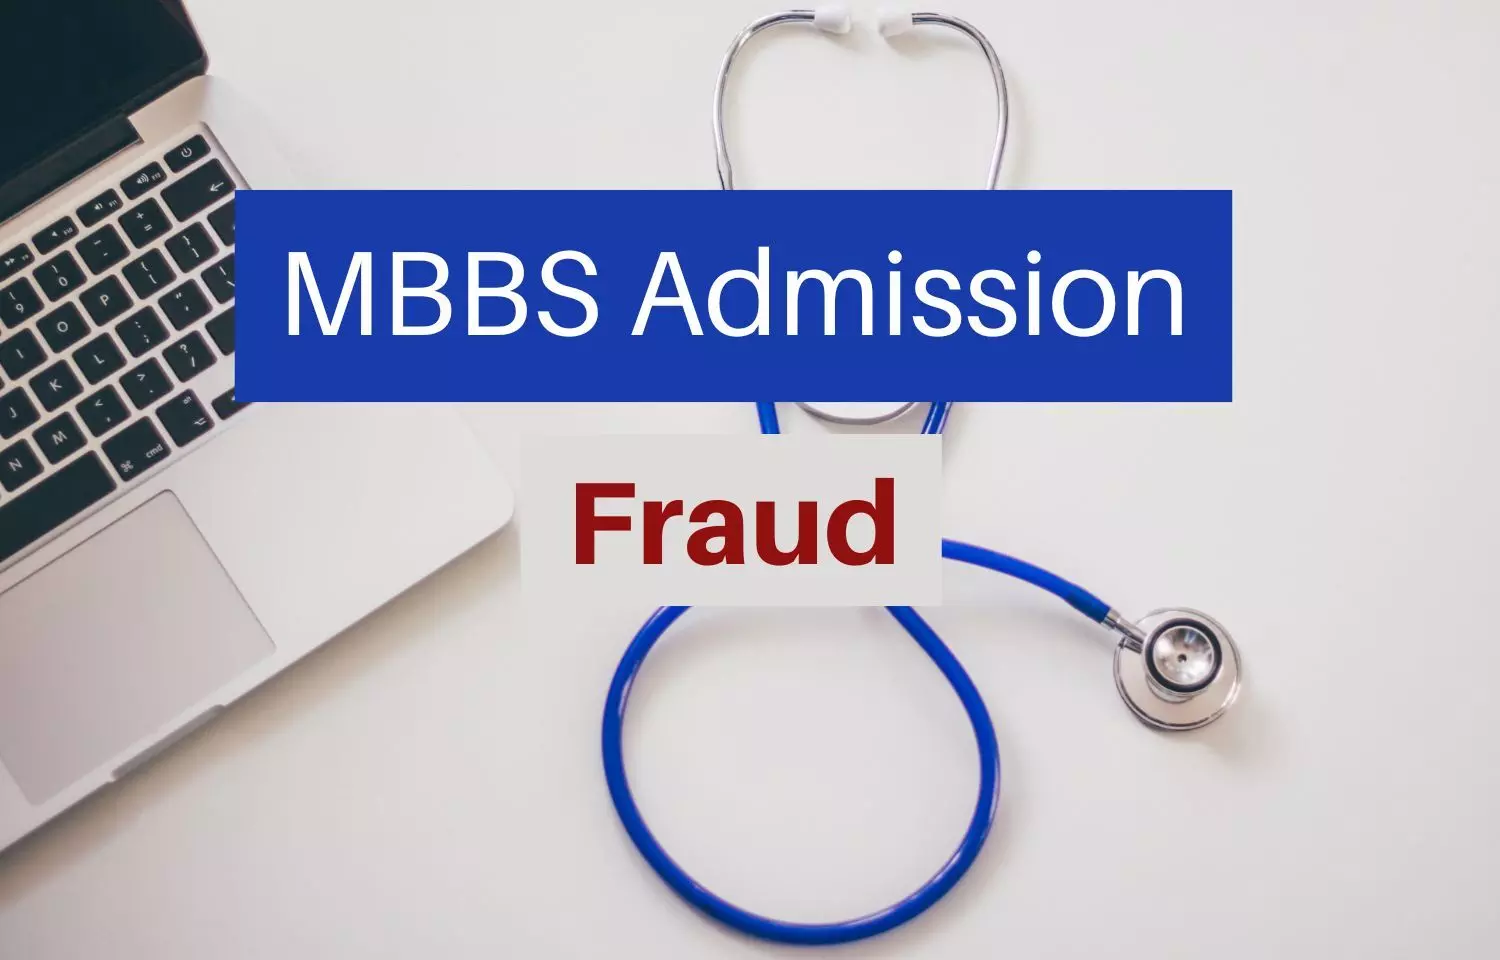 Maha: Man held for duping MBBS aspirants of Rs 62 lakh on pretext of admission in medical colleges